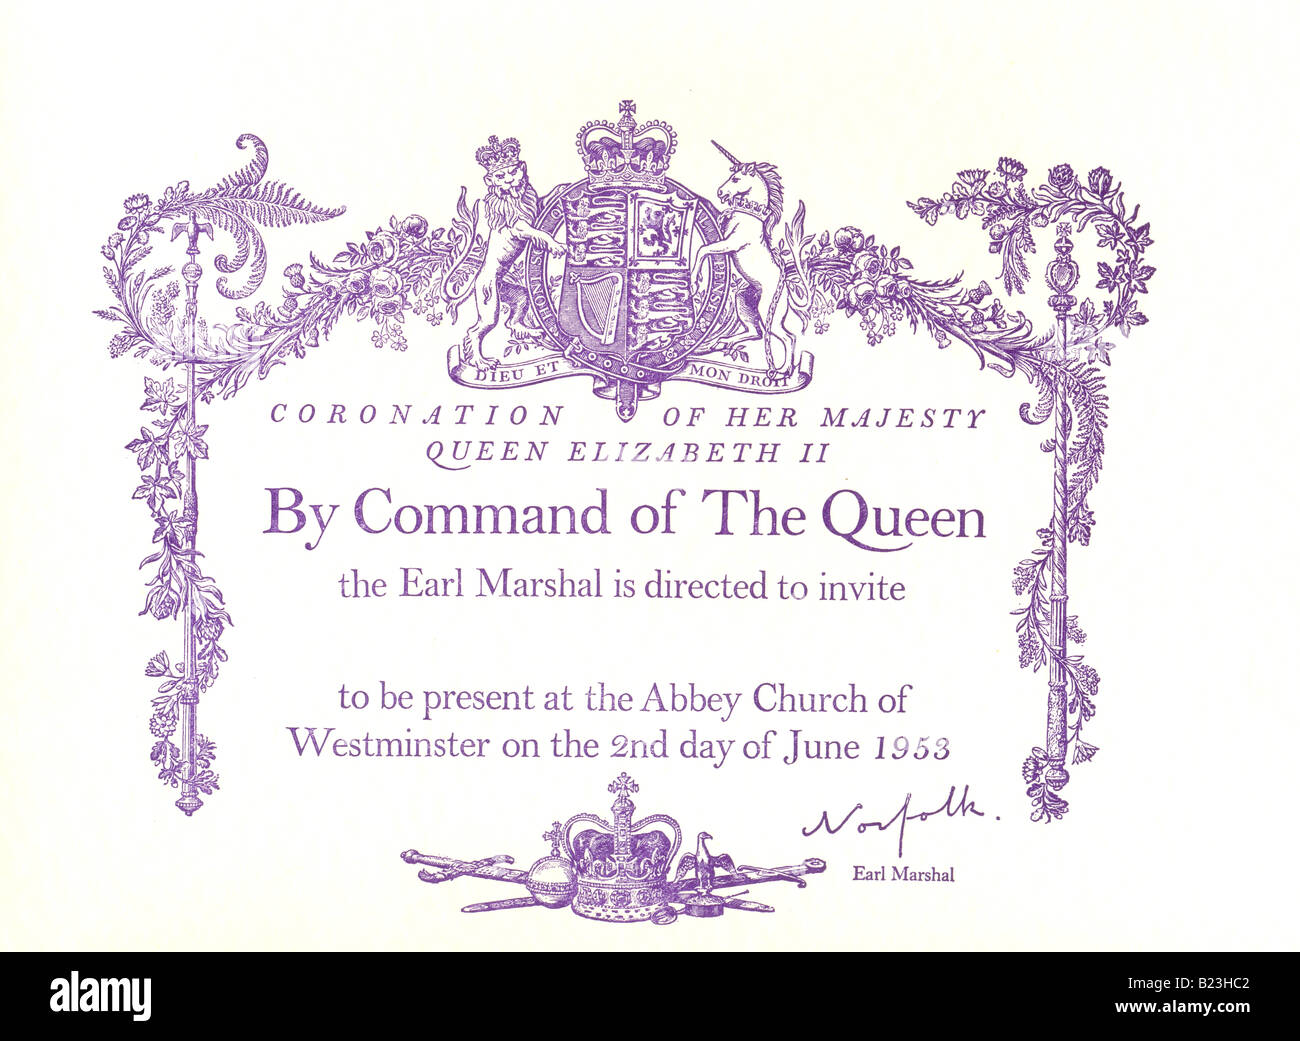 Invitation to the Coronation of Her Majesty Queen Elizabeth II 1953 Stock Photo